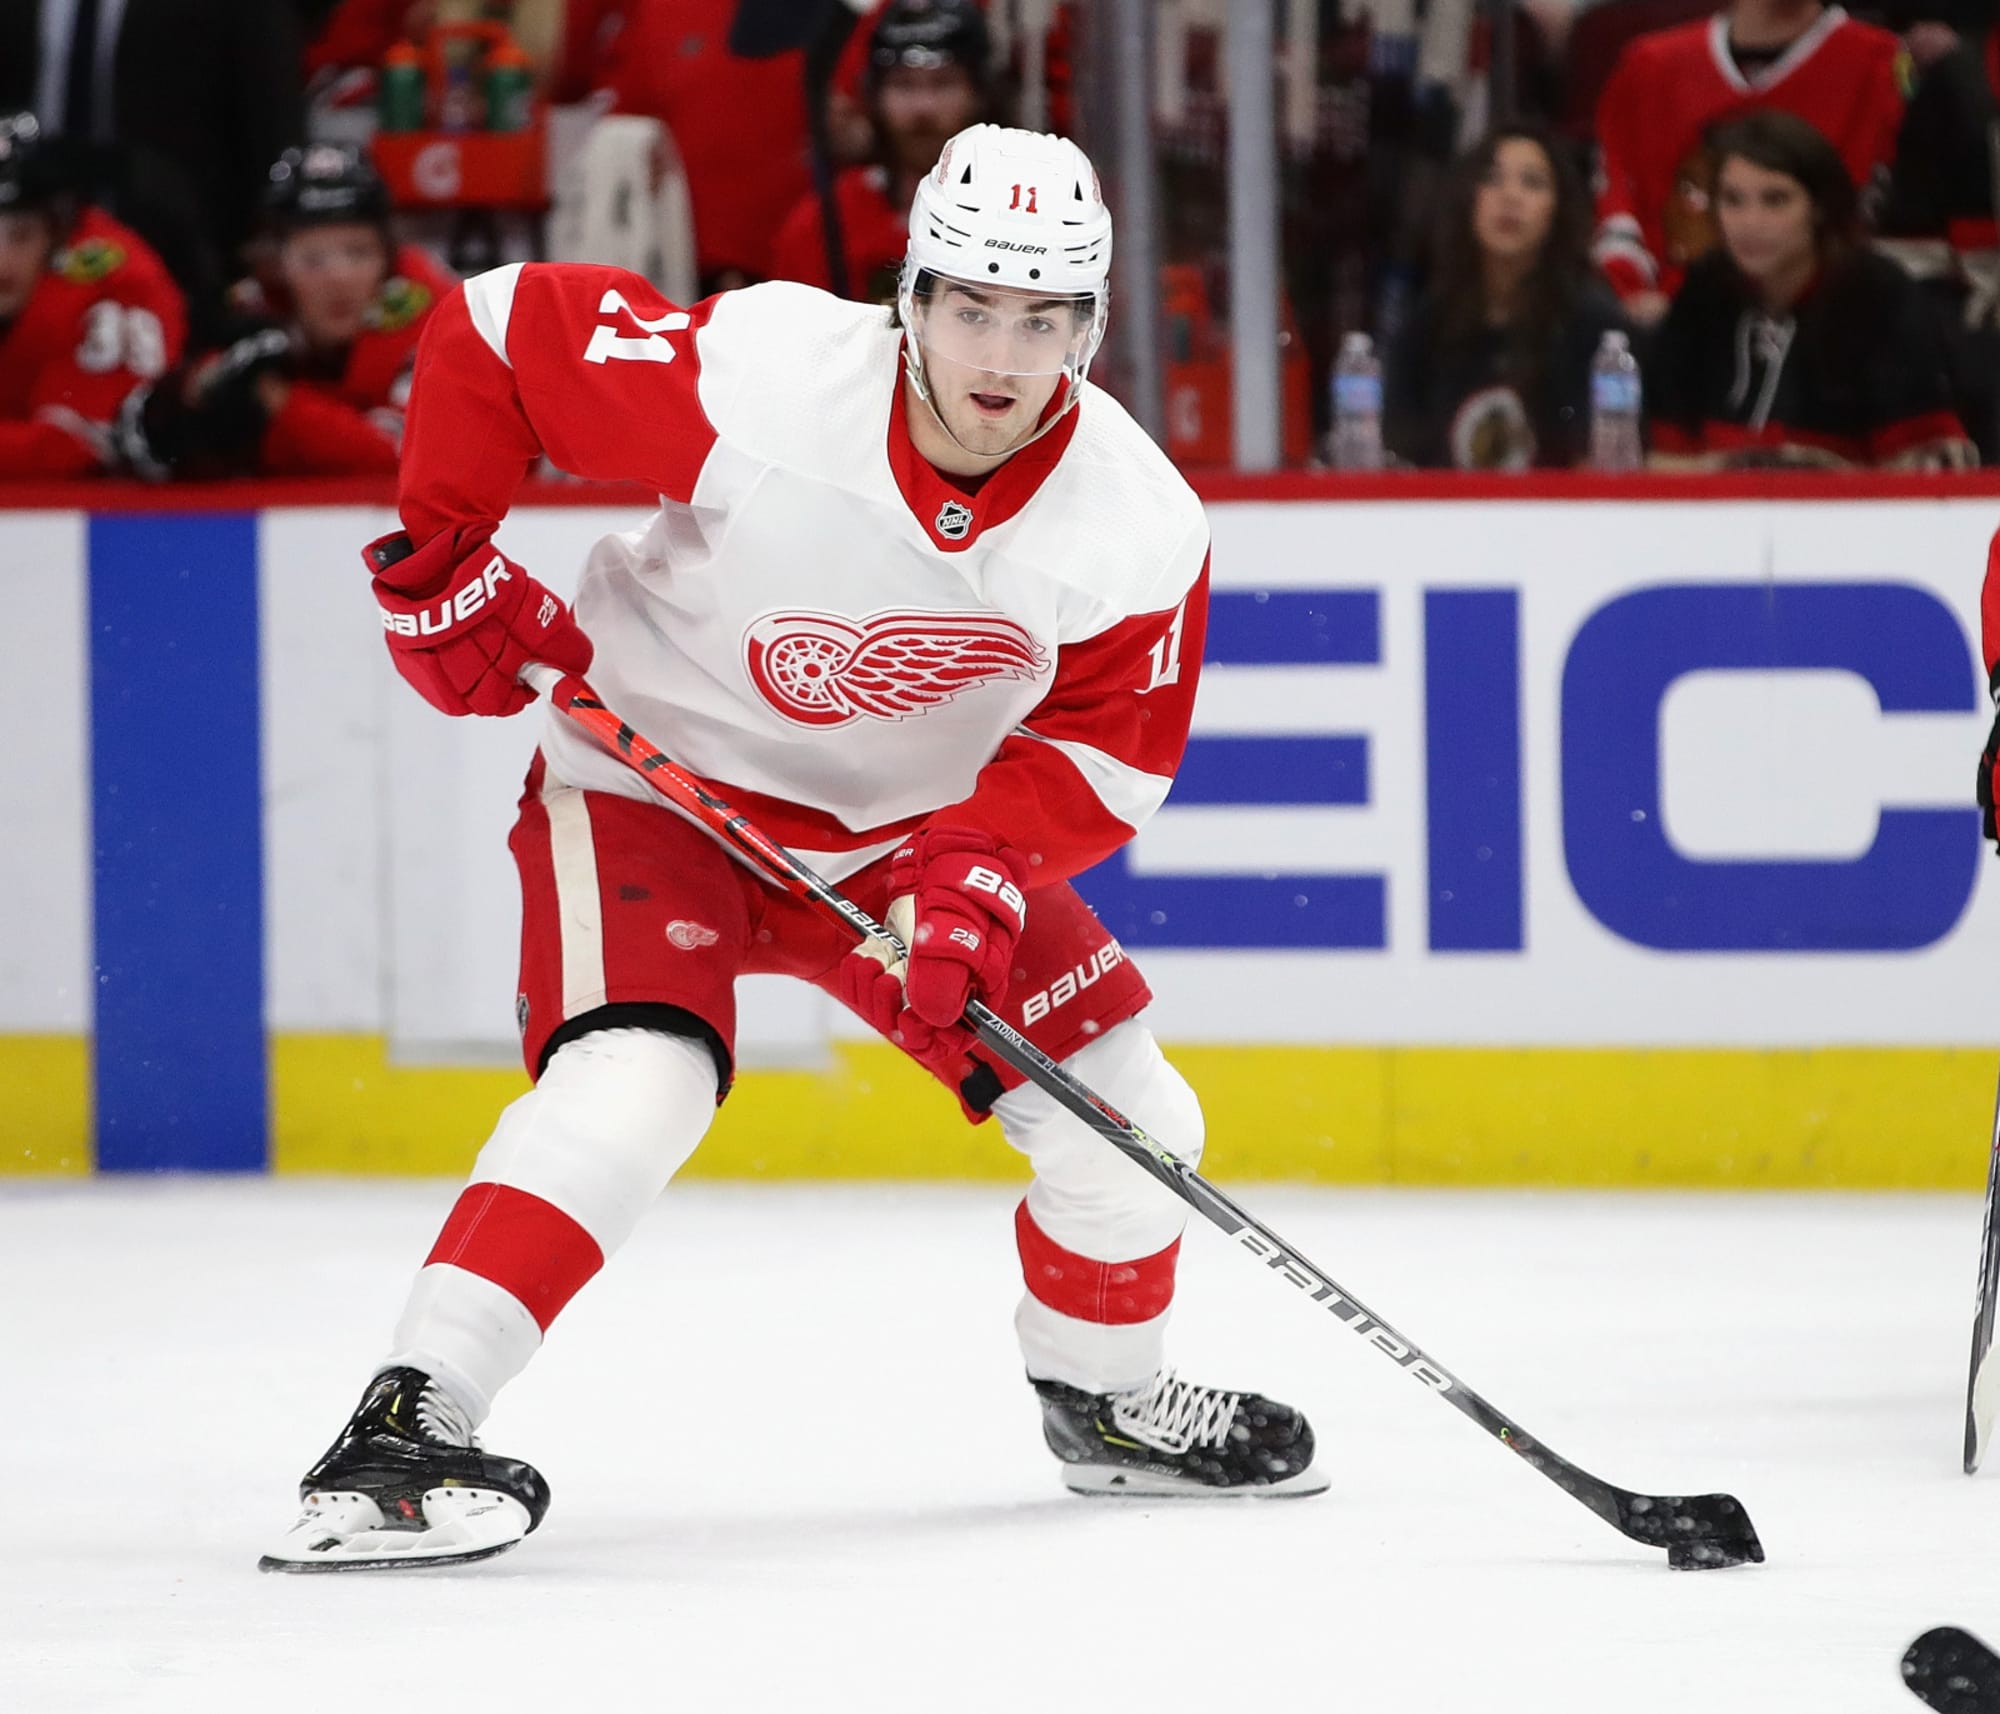 2020 Vision: What the Detroit Red Wings roster will look like in